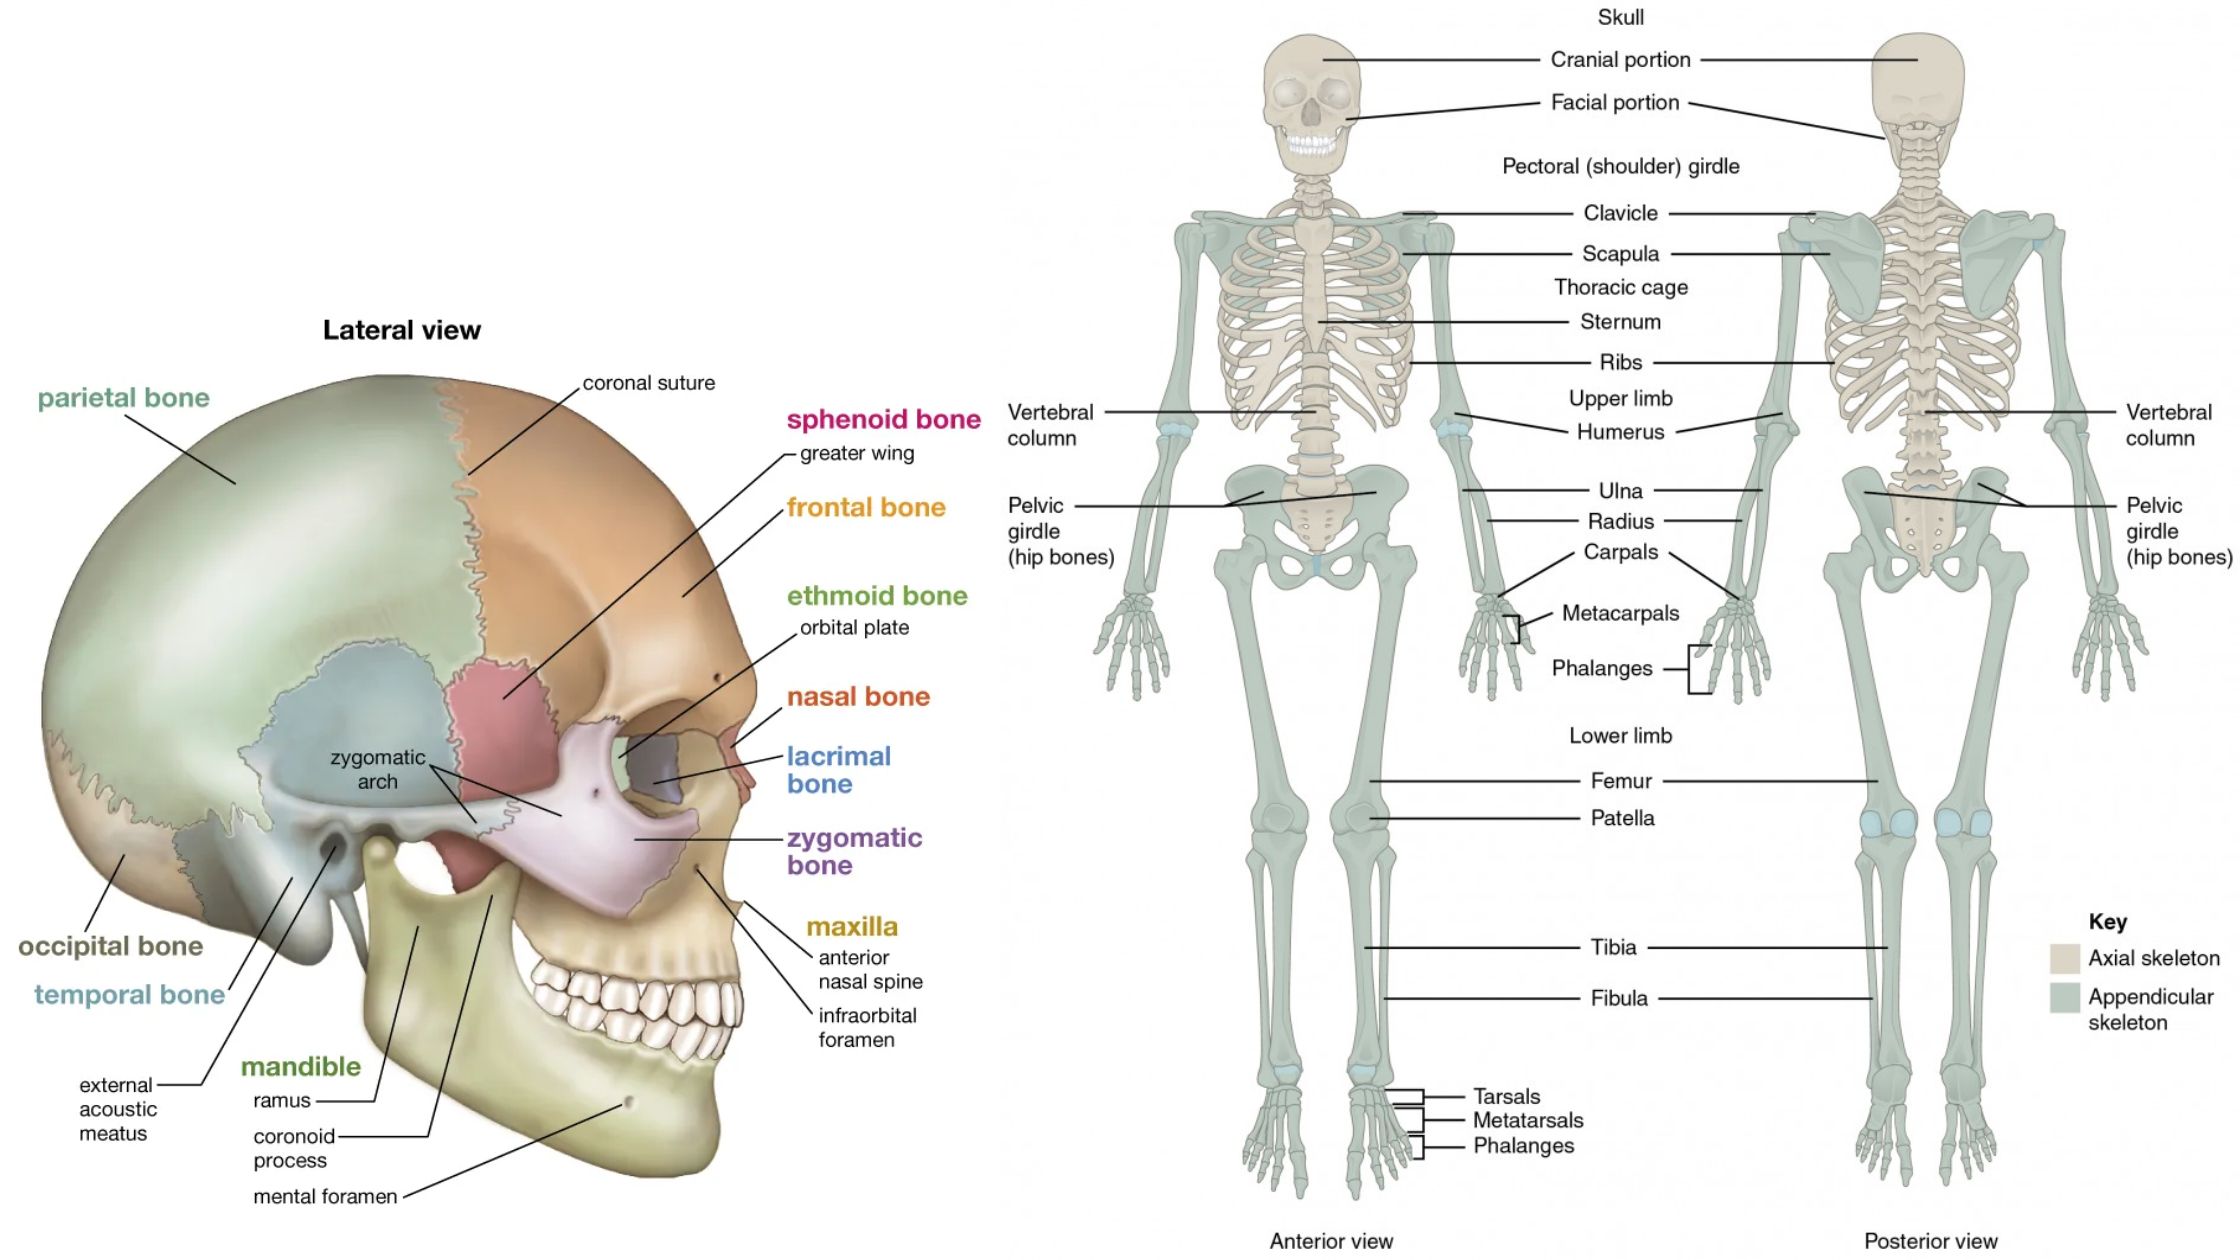 Skeletal System - Definition, Types, Anatomy, Functions